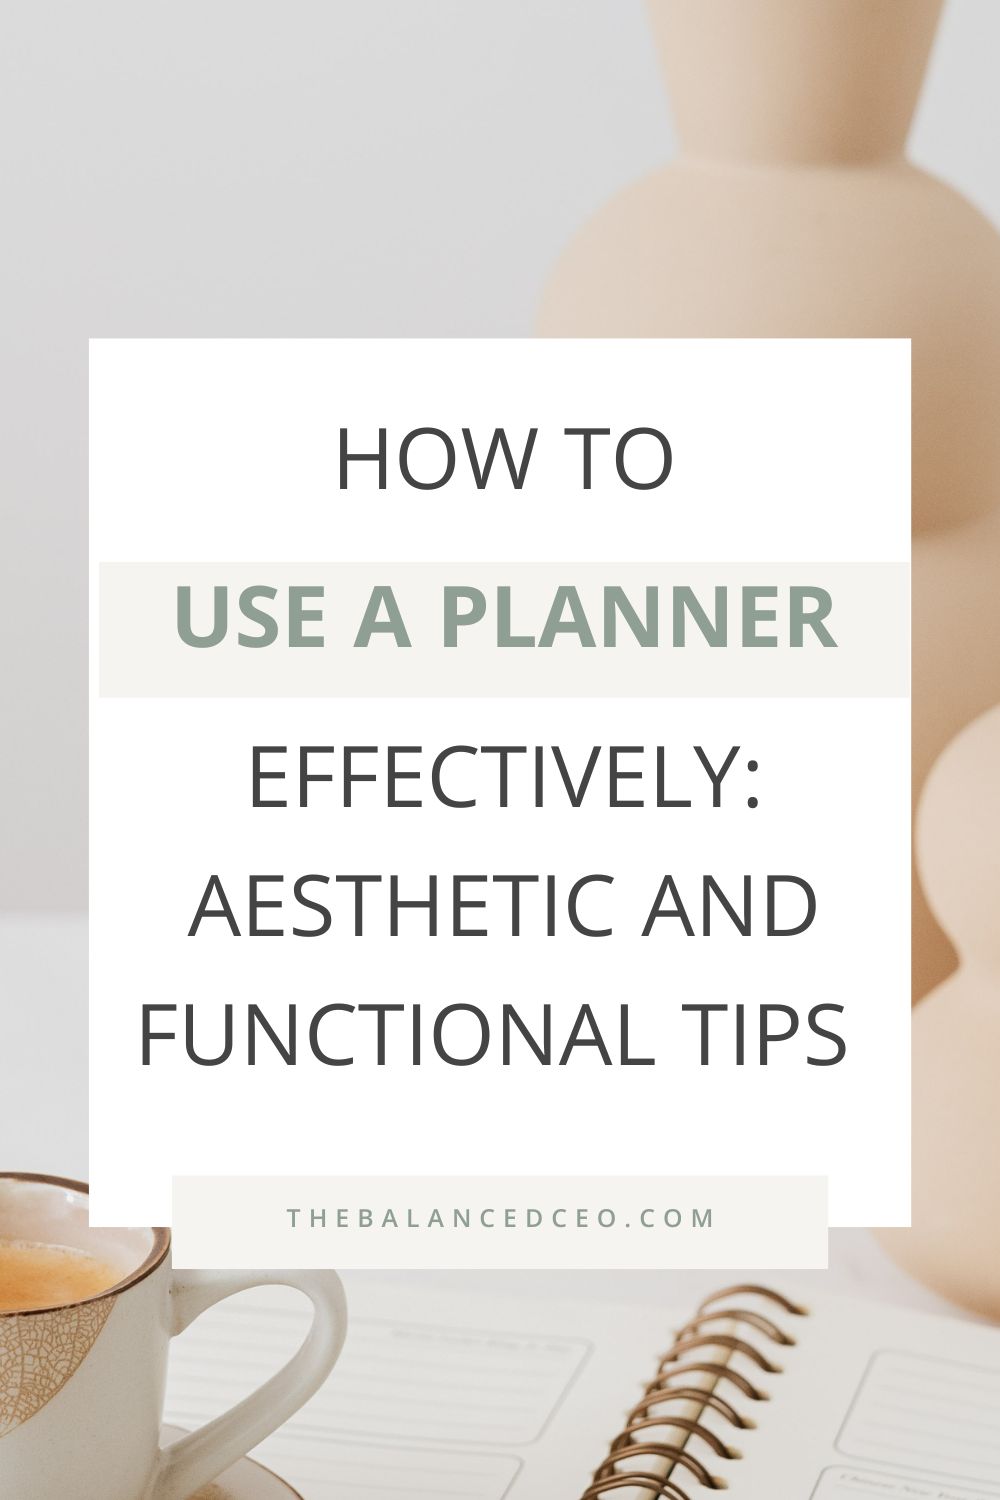 How to Use a Planner Effectively: Aesthetic and Functional Tips